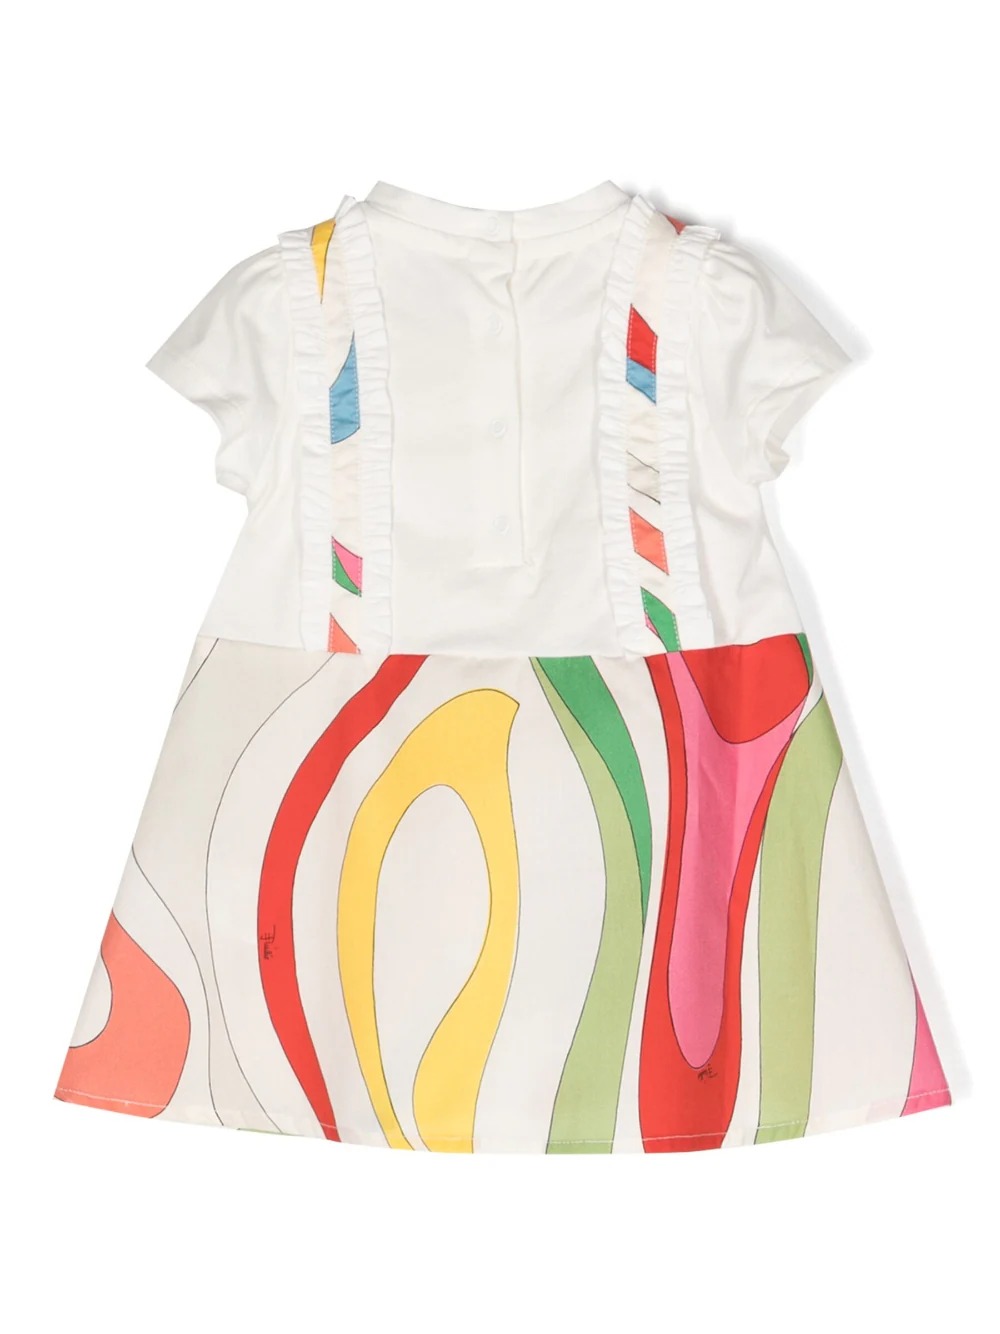 White Short-Sleeved Dress With Marble Print - EMILIO PUCCI JUNIOR